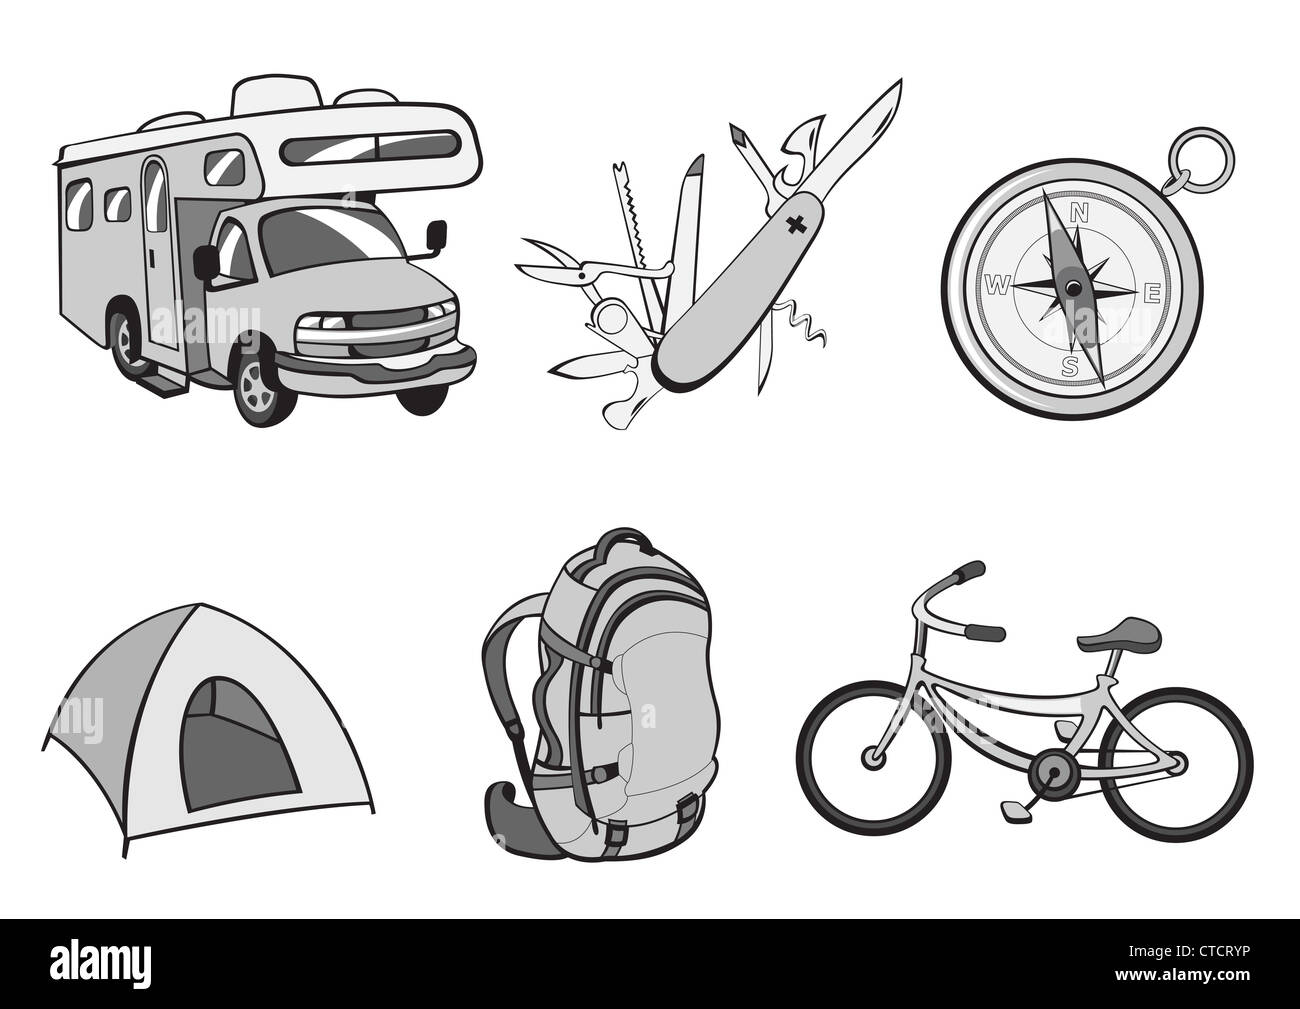 Vector illustration Outdoor camping icons Includes icons compass Travel Trailer penknife tent rucksack bicycle Stock Photo